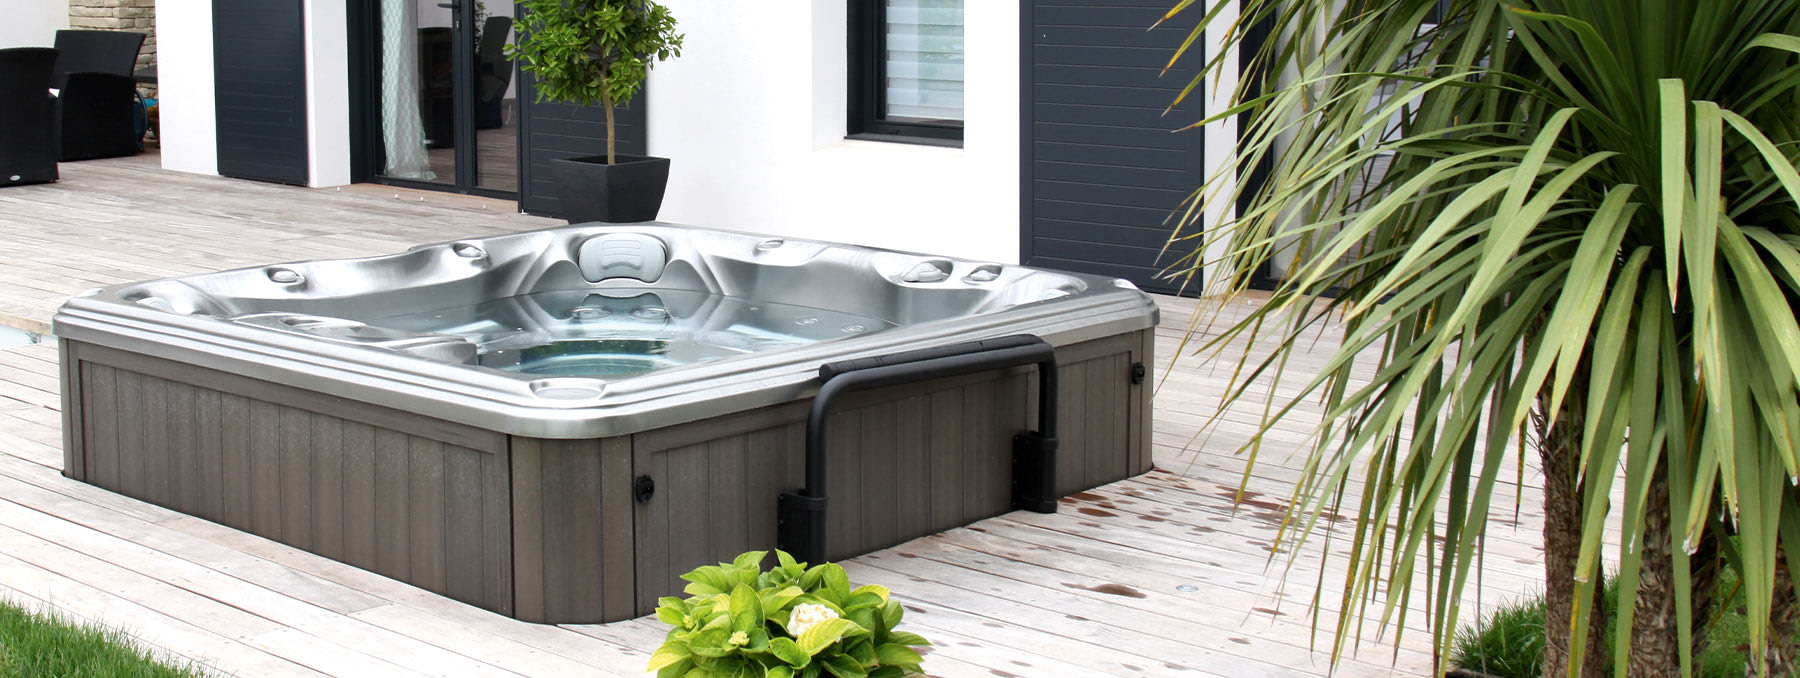 Discover Our Sustainable Water Care Products for Hot Tubs